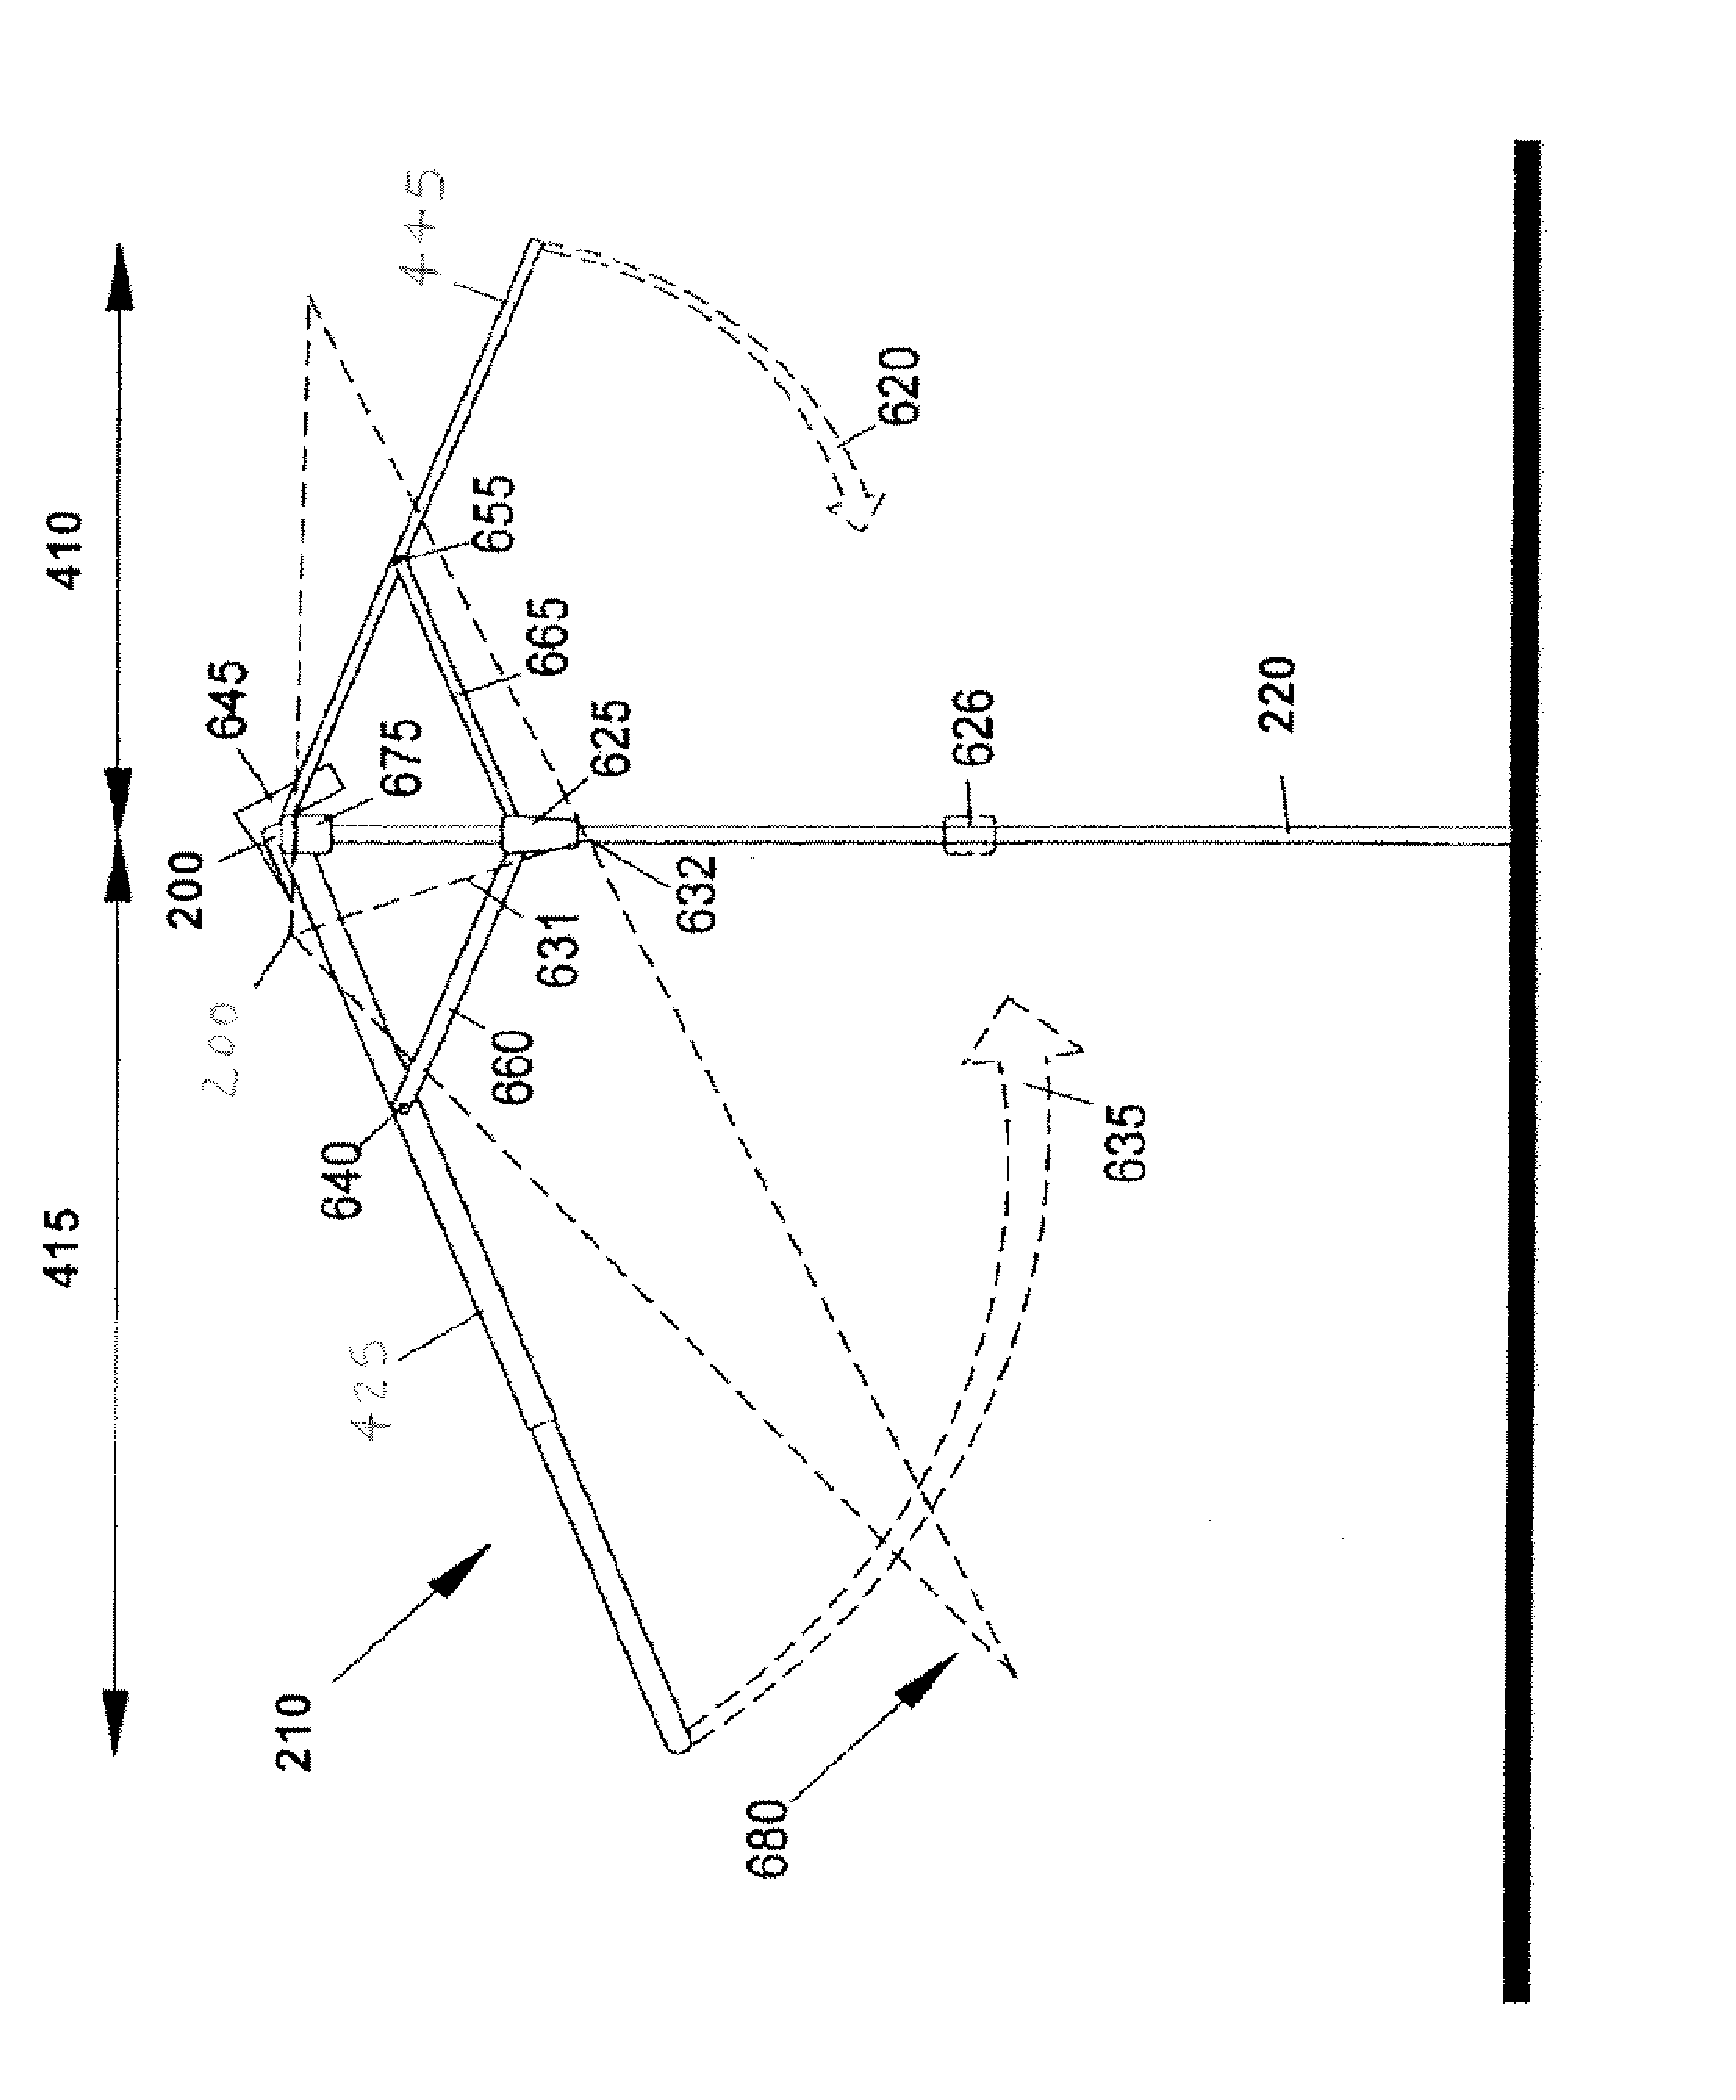 Canopy for a stationary covering device having an asymmetrical shape